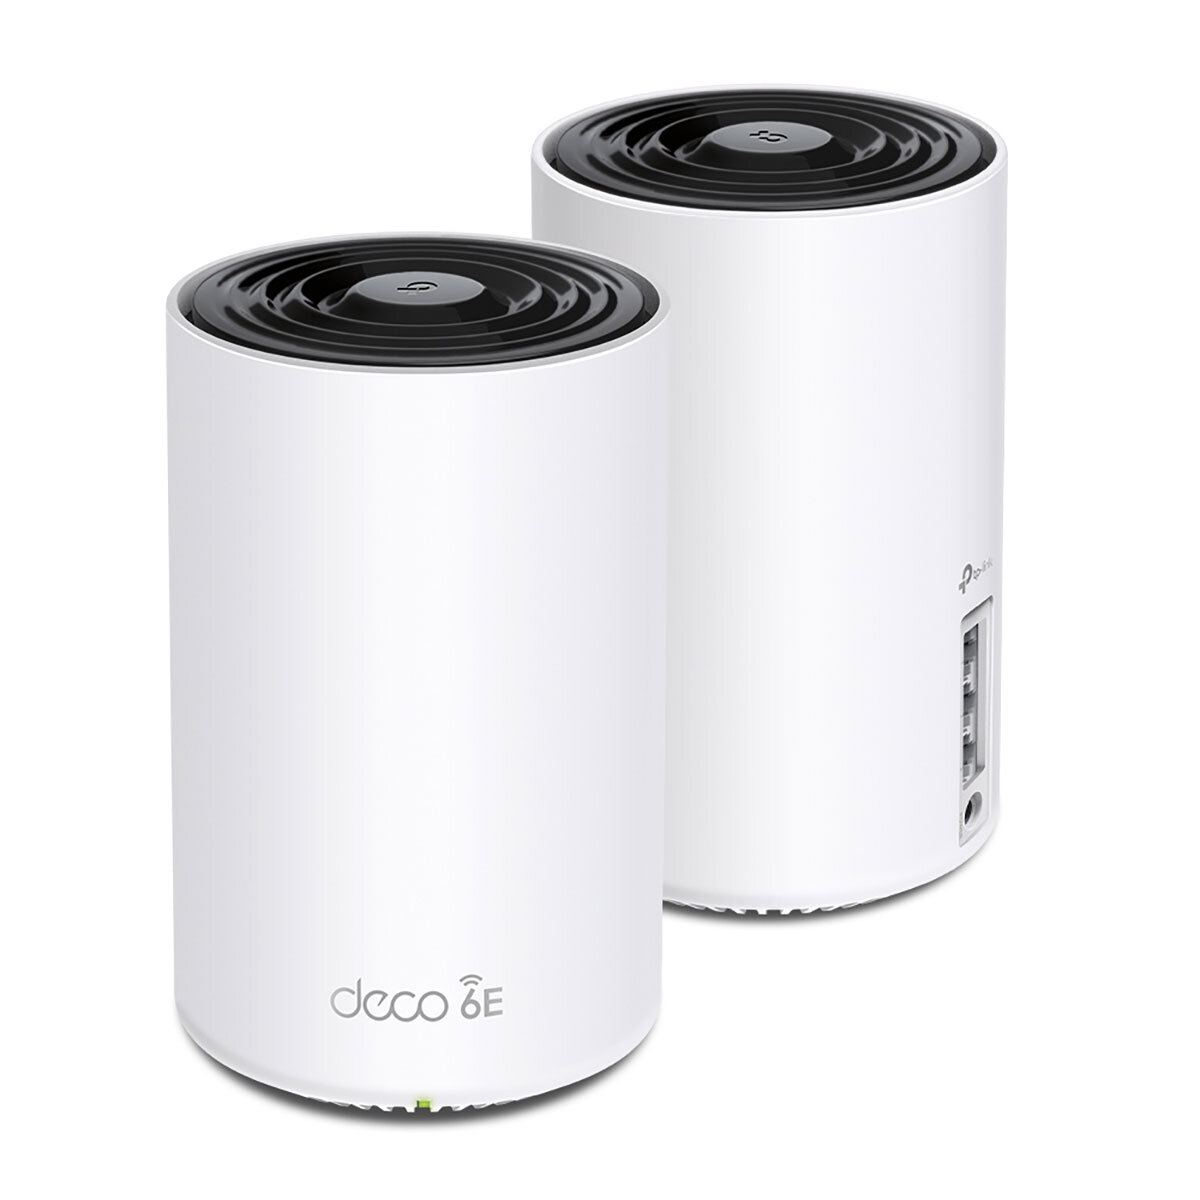 TP-LINK DECO XE75 (4-PACK) WIFI 6E TRI-BAND WHOLE HOME MESH SYSTEM at Costco.co.uk